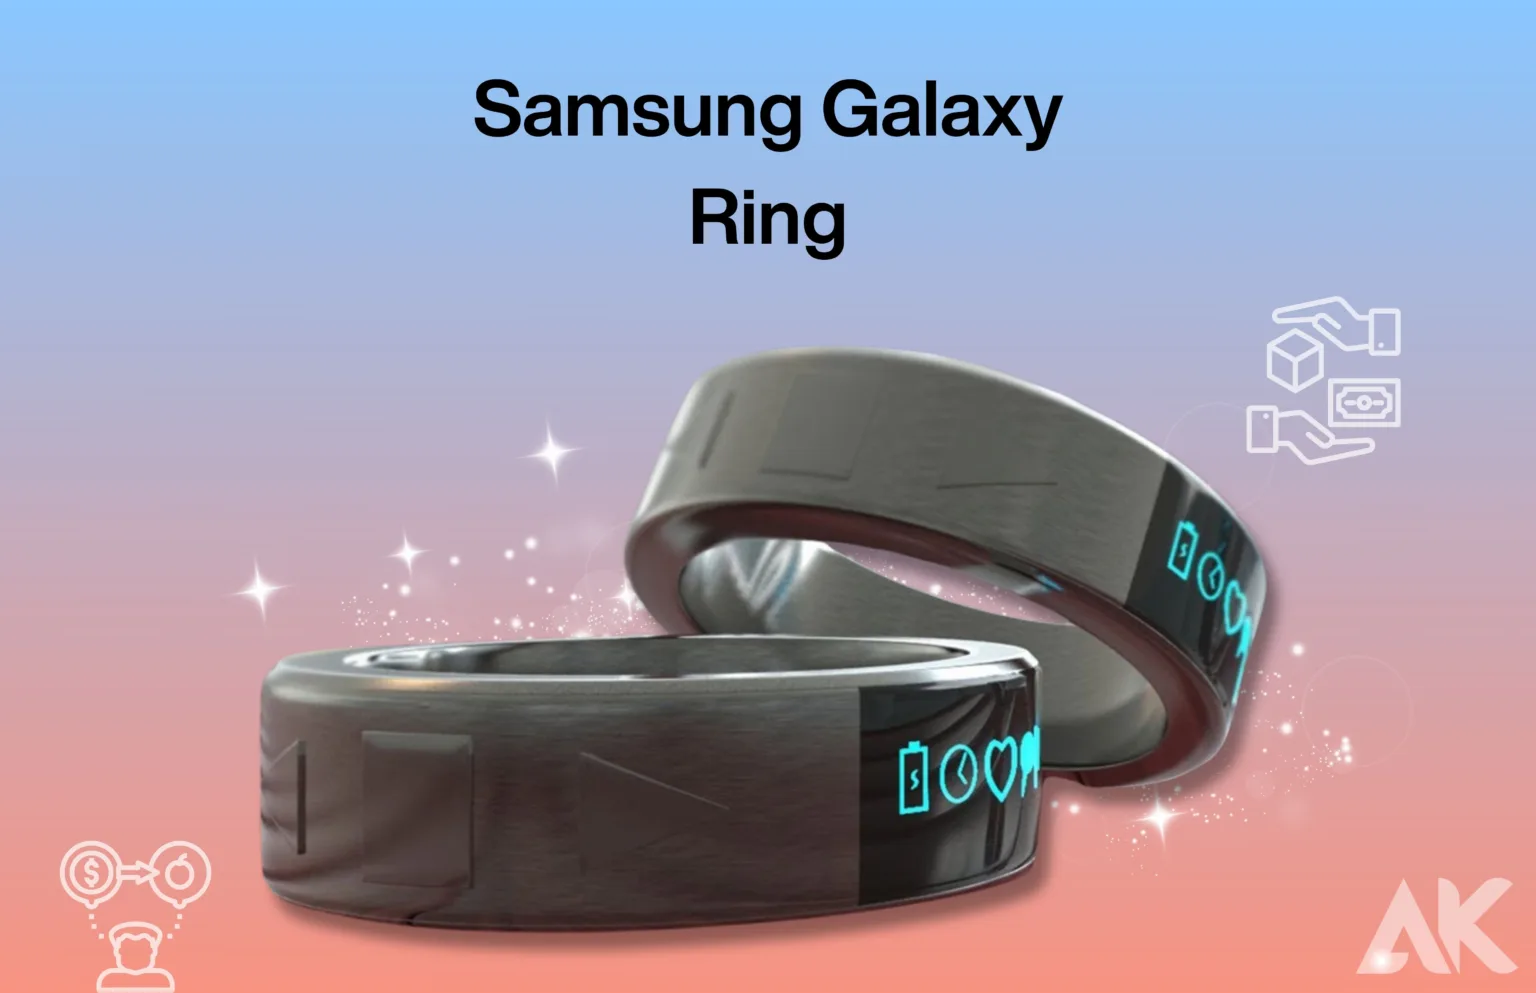 Where to buy the Samsung Galaxy Ring